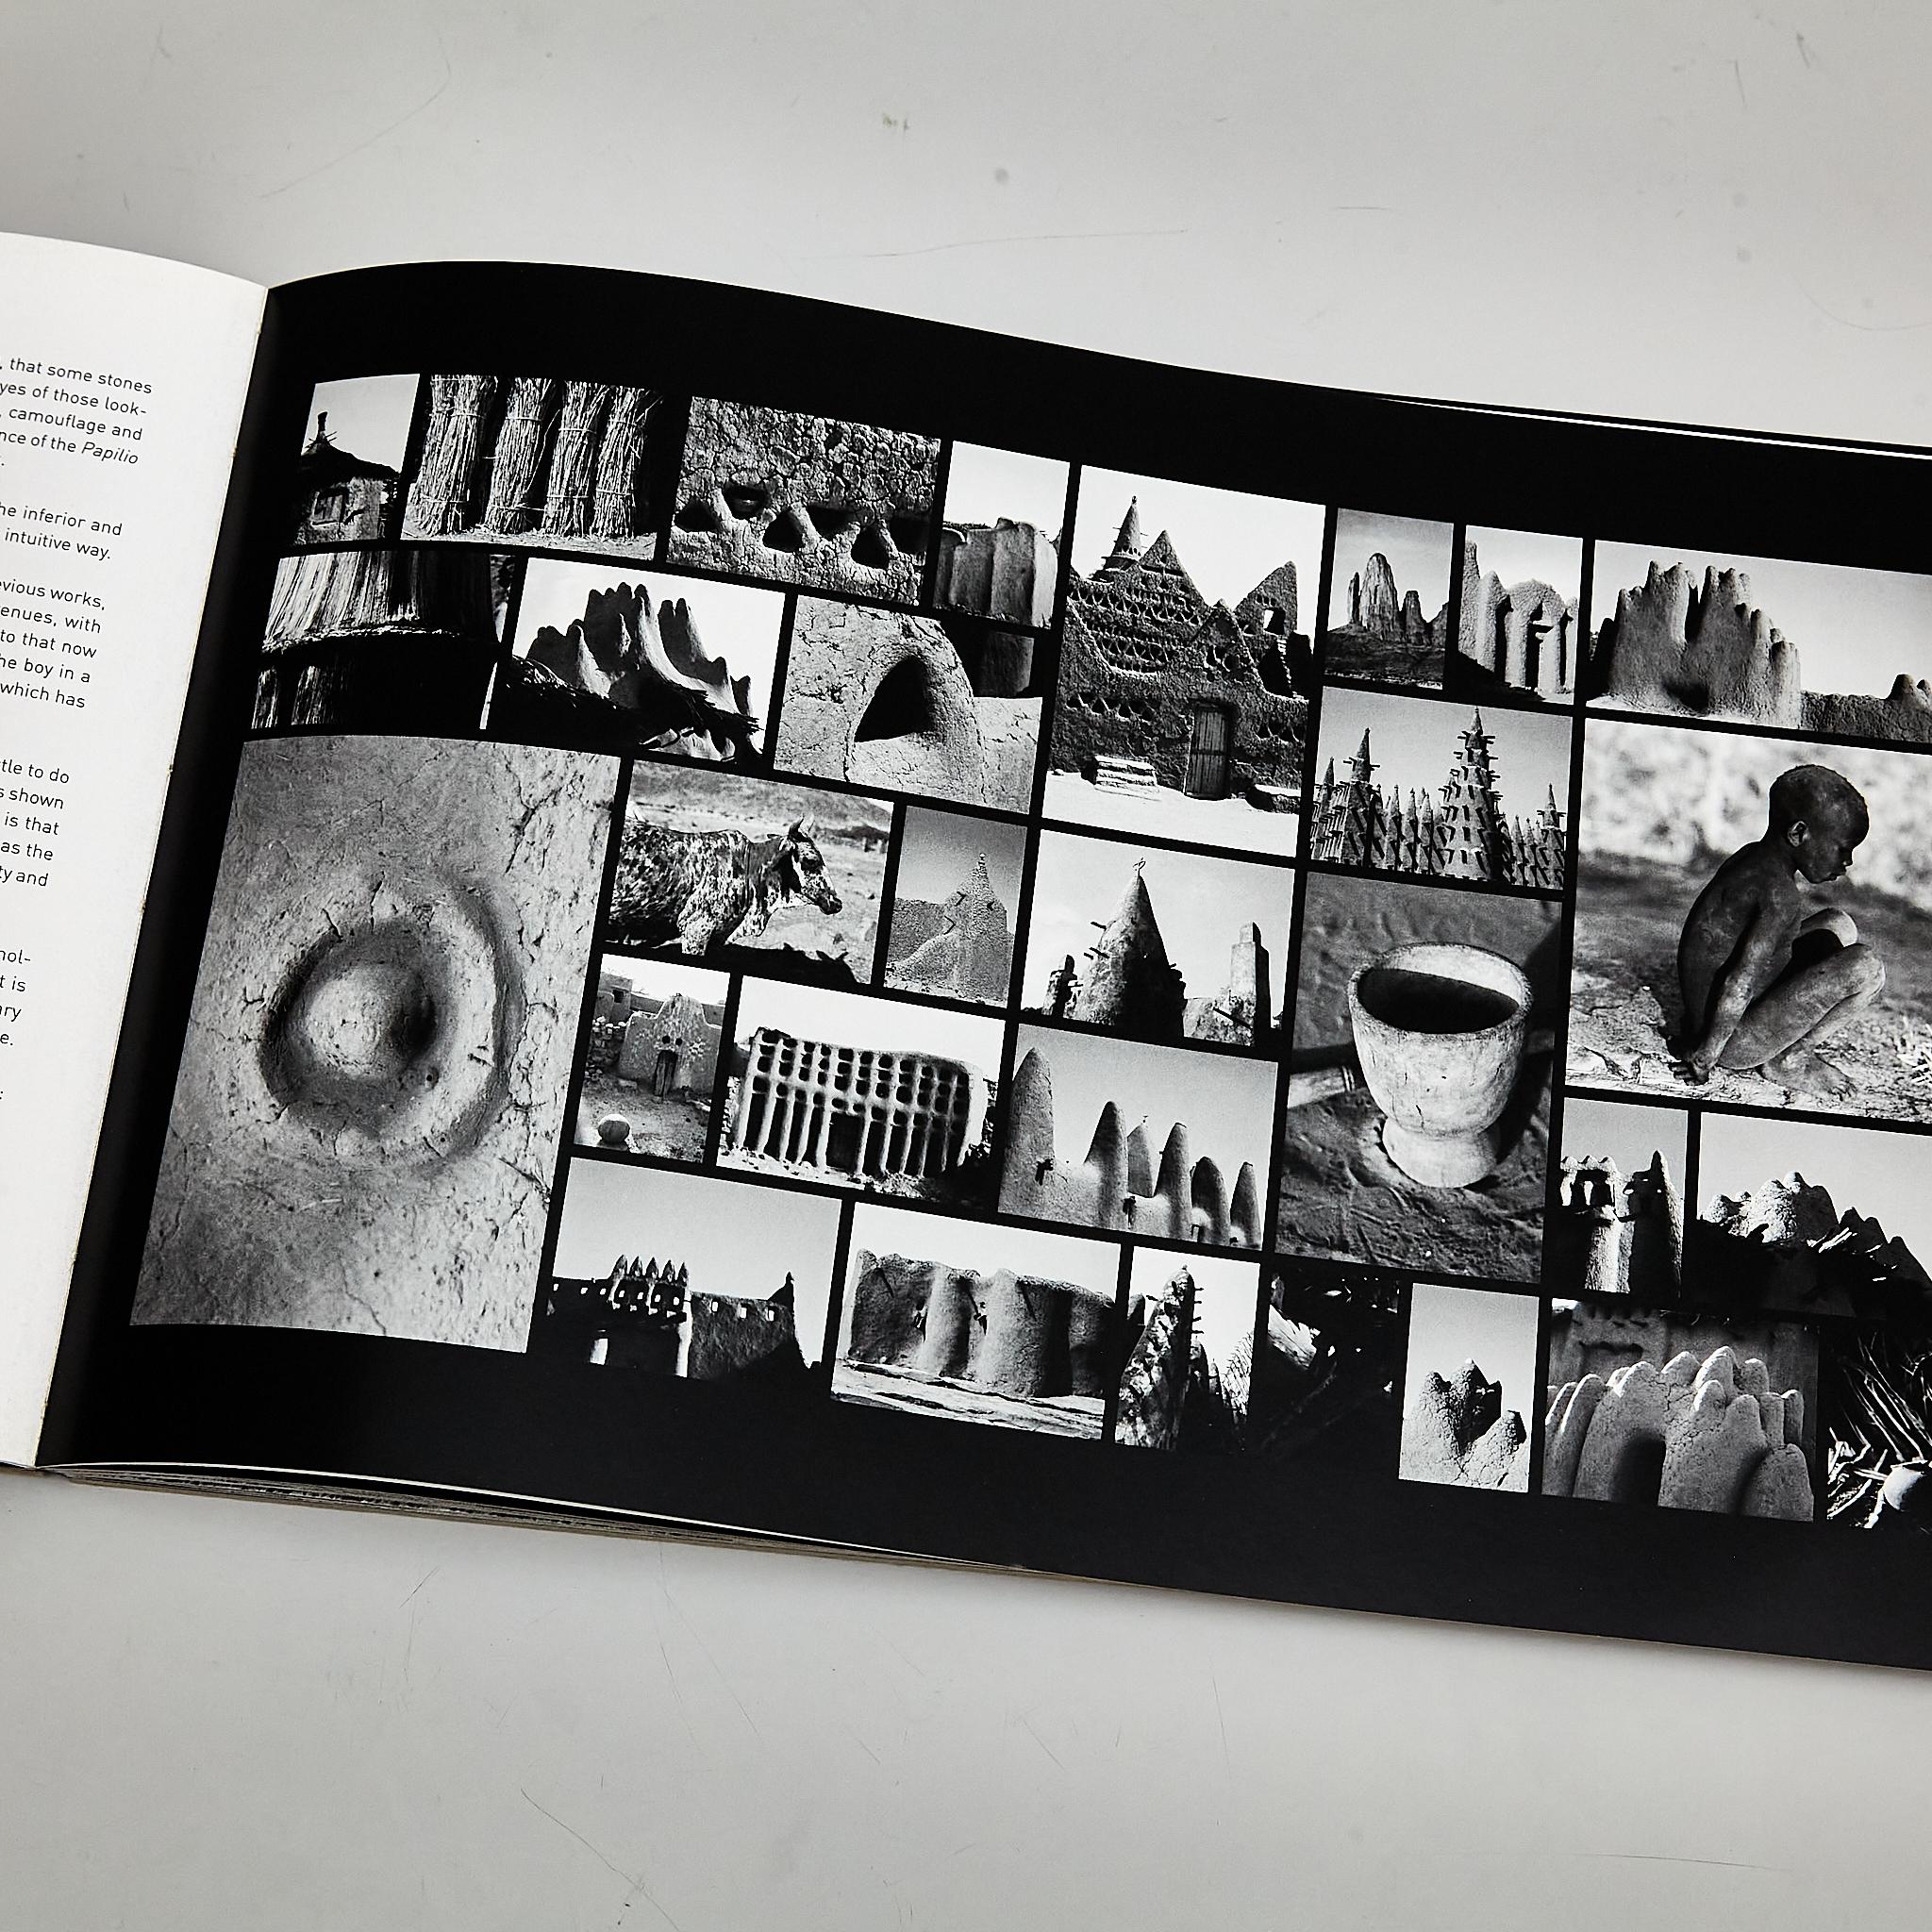 Late 20th Century Terra: Miquel Arnal's Stunning Photo Book For Sale